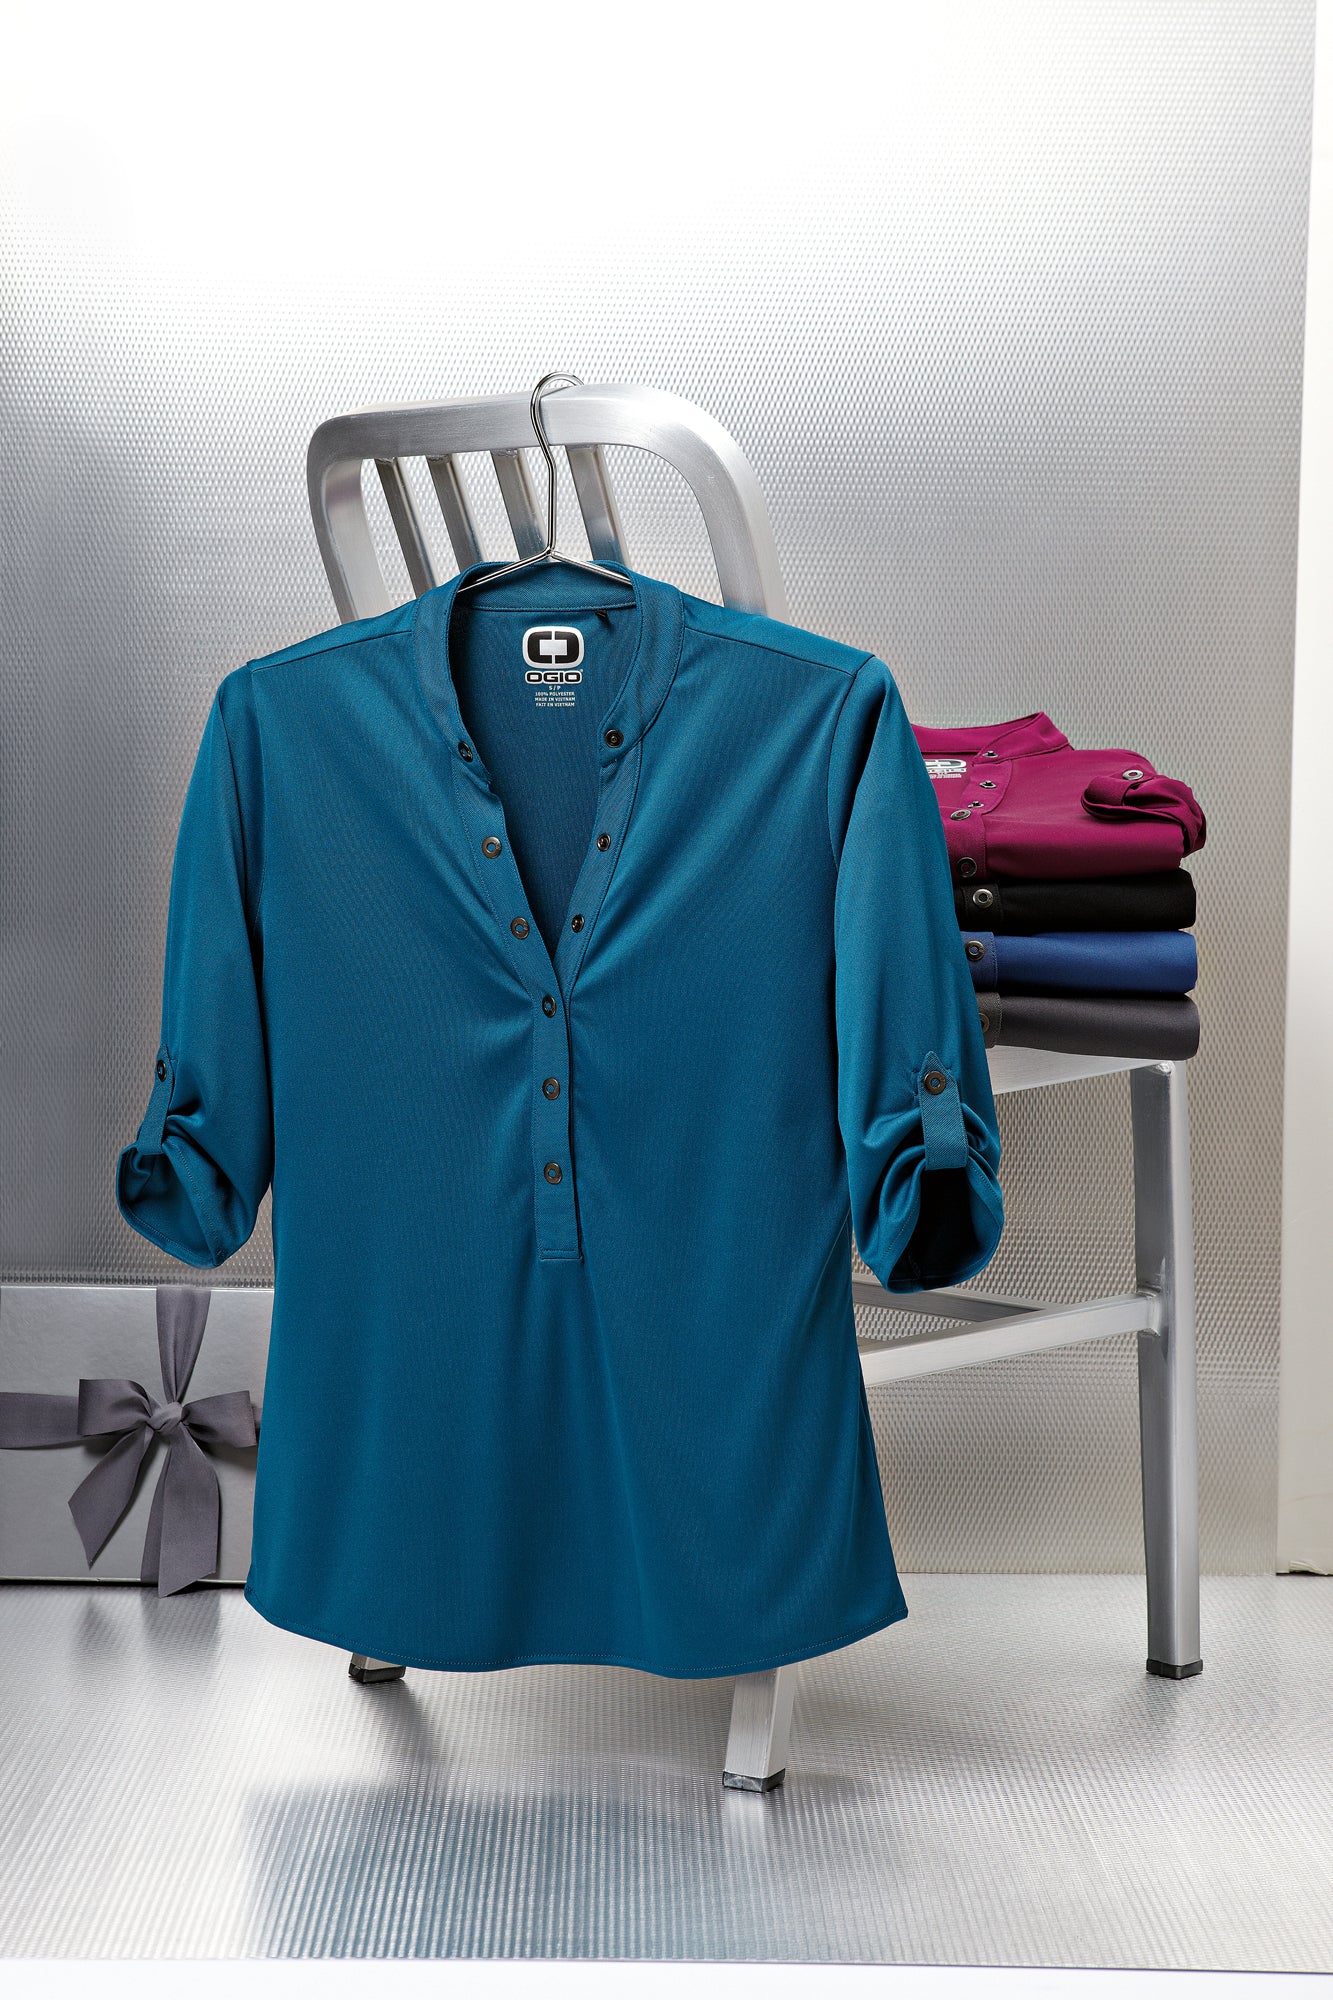 ogio womens crush henley polos hanging and folded on a metal chair